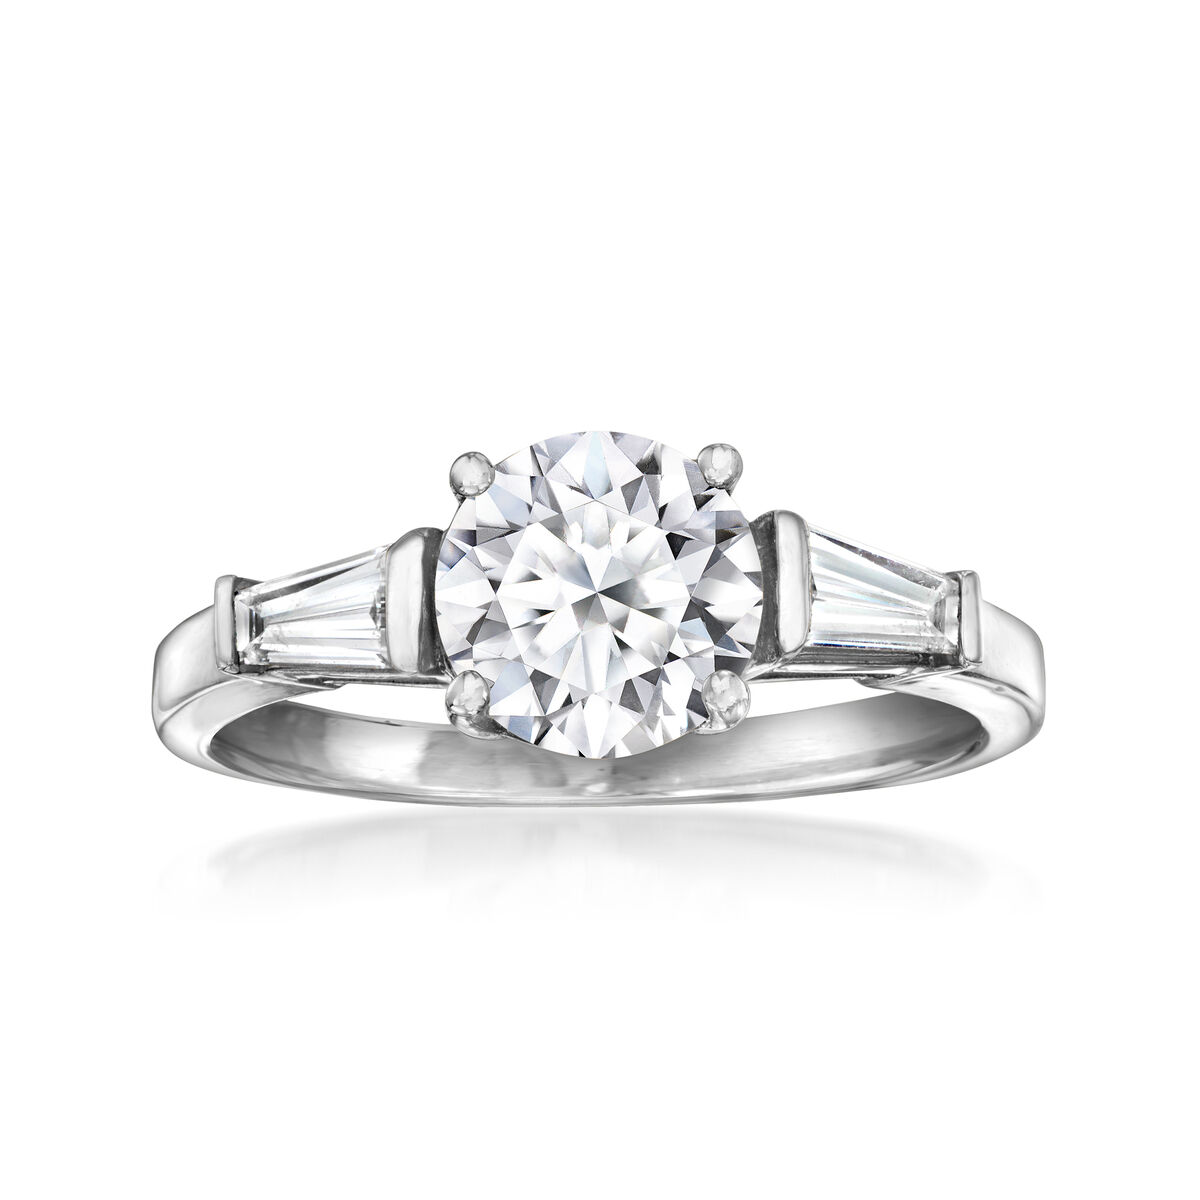 1.80 ct. t.w. Lab-Grown Diamond Ring in 14kt White Gold. Size 5 | Ross ...